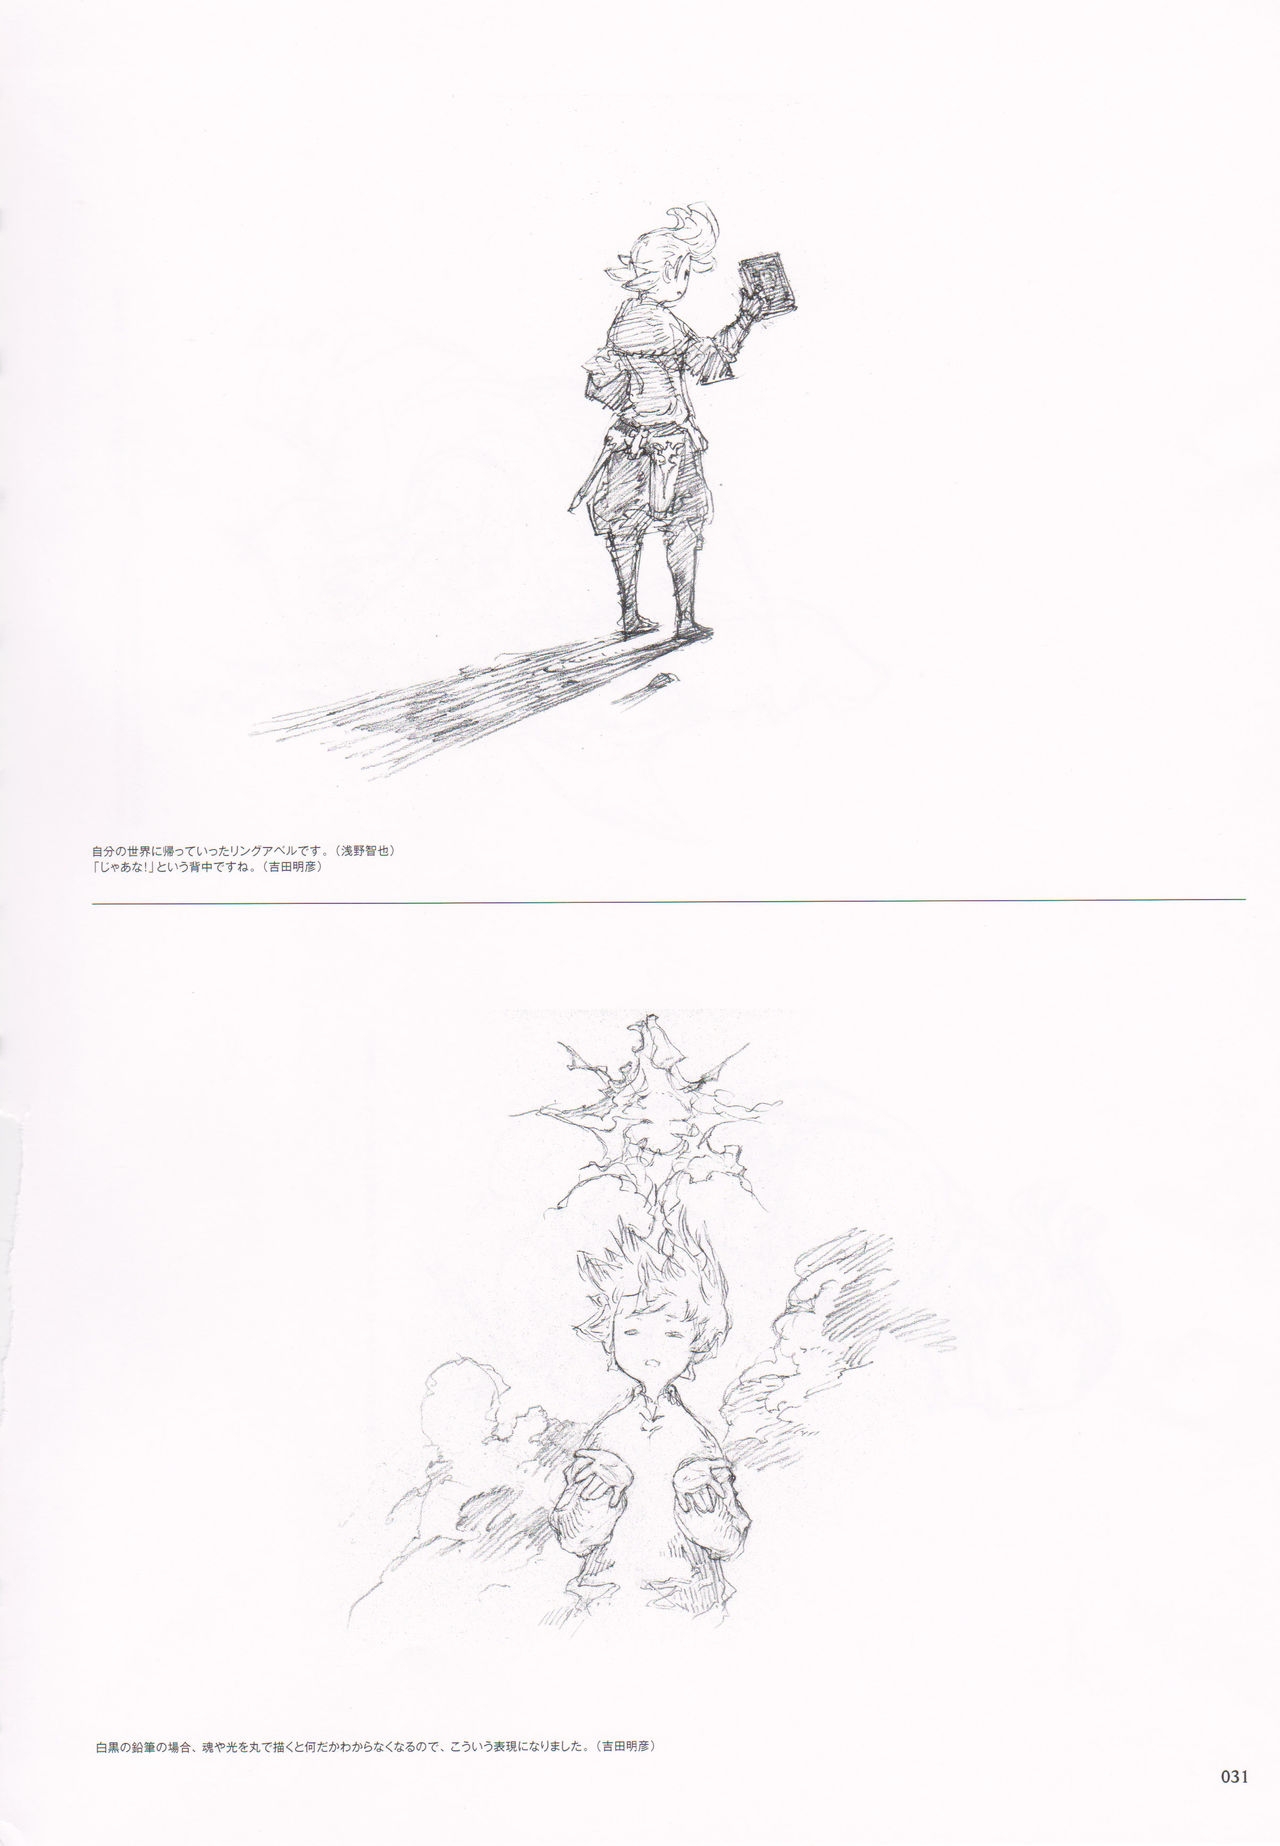 Bravely Second - End Layer - Design Works THE ART OF BRAVELY 2013-2015 31